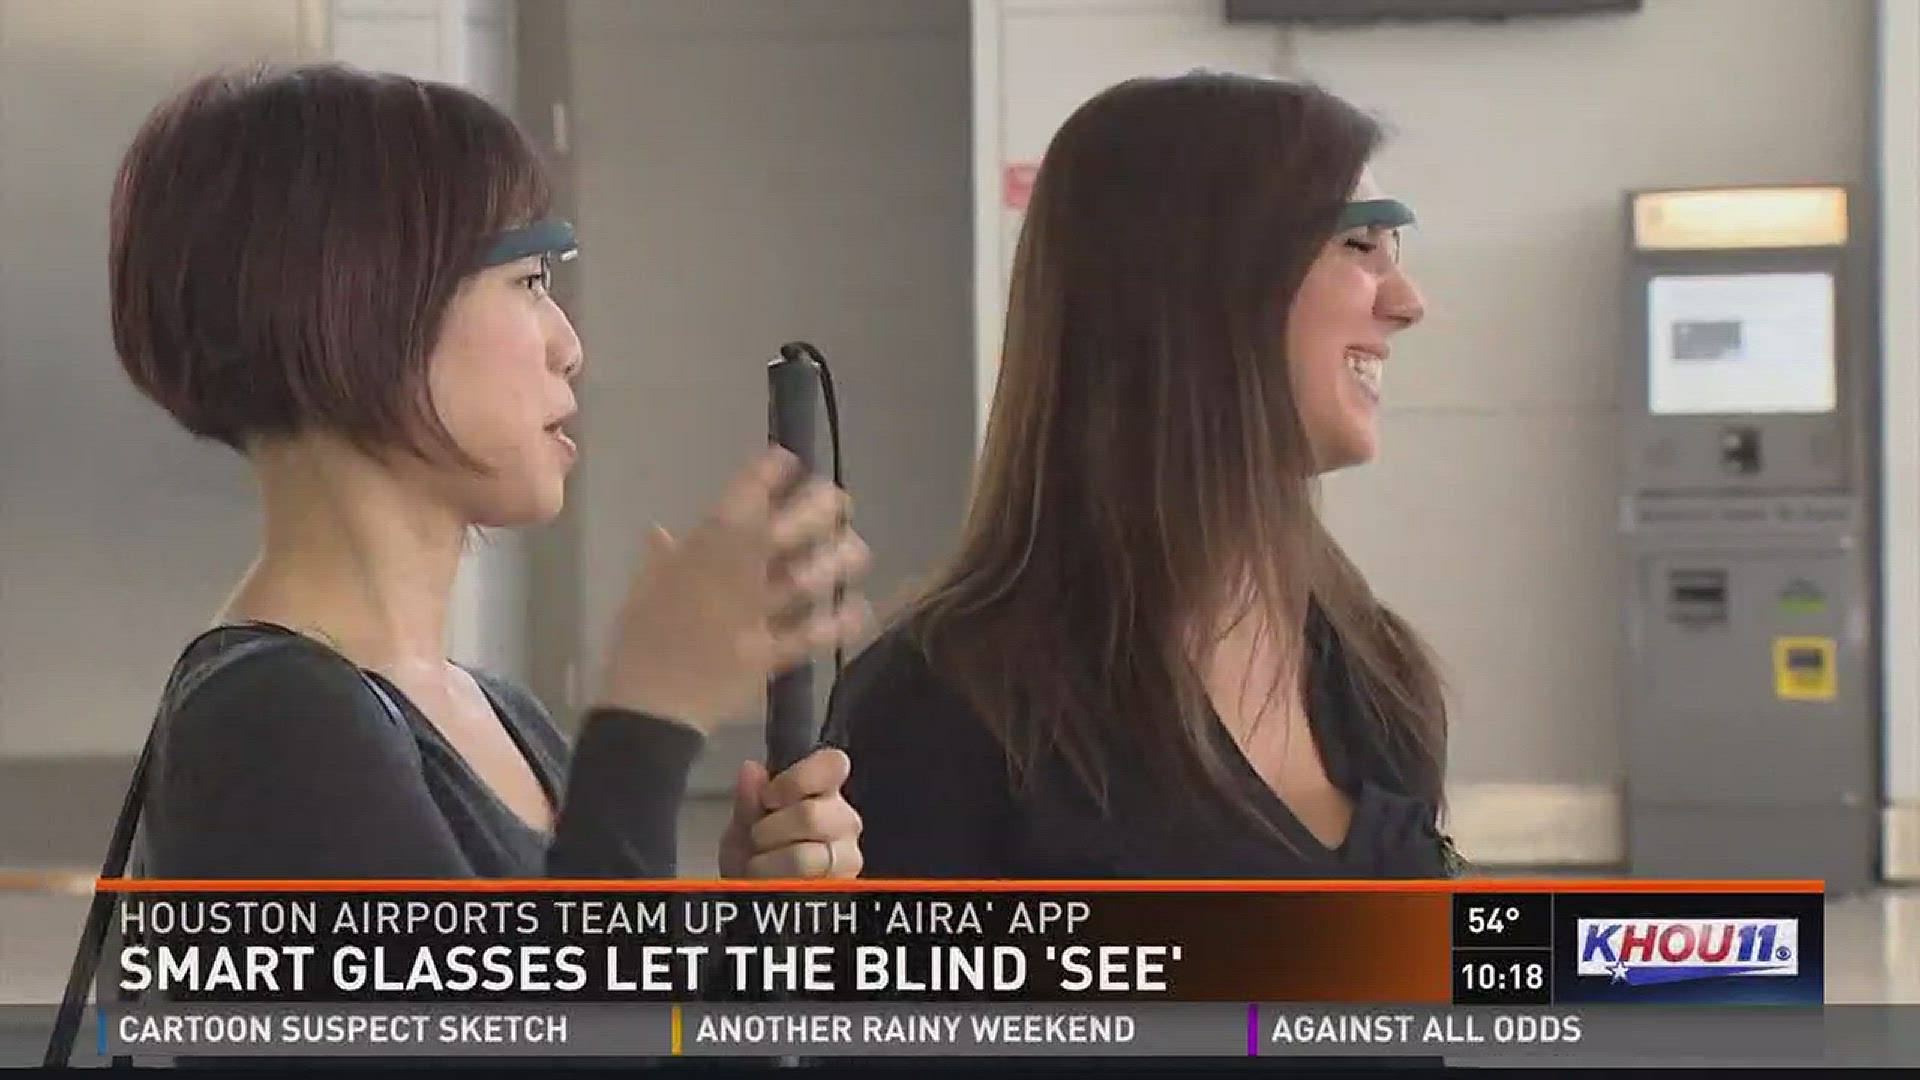 Houston airports are offering people with poor vision a new way to see when traveling.